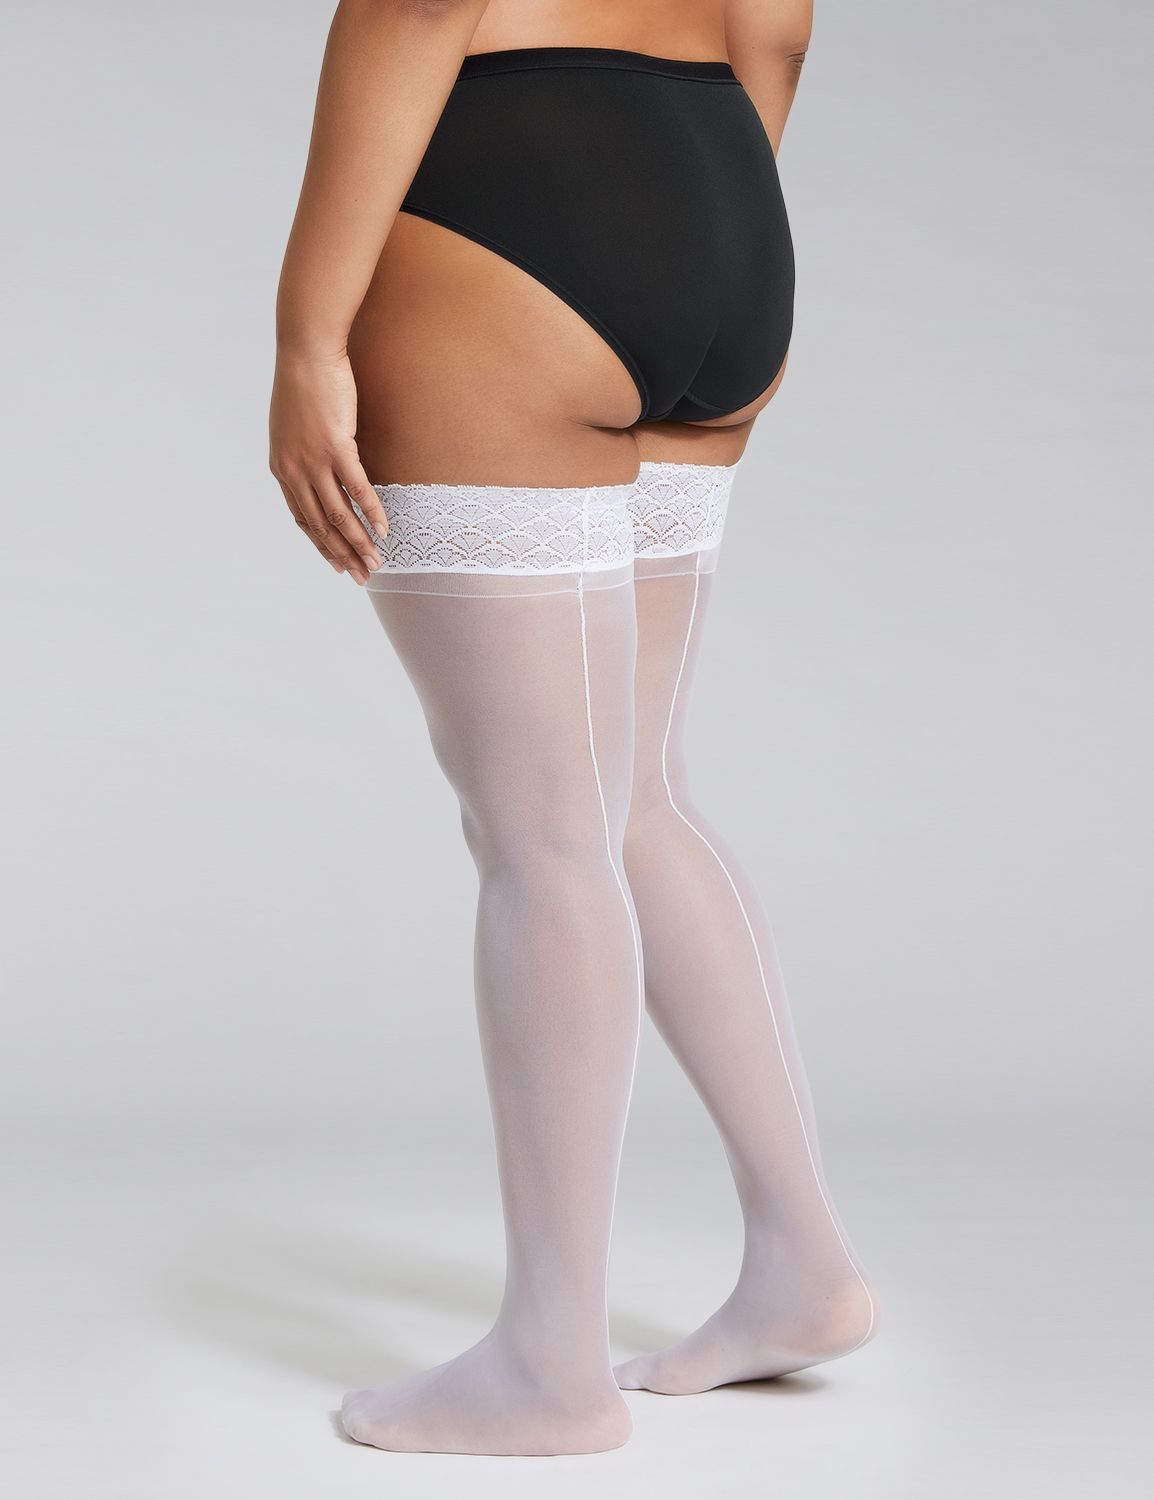 Lace Top Back Seam Thigh Highs